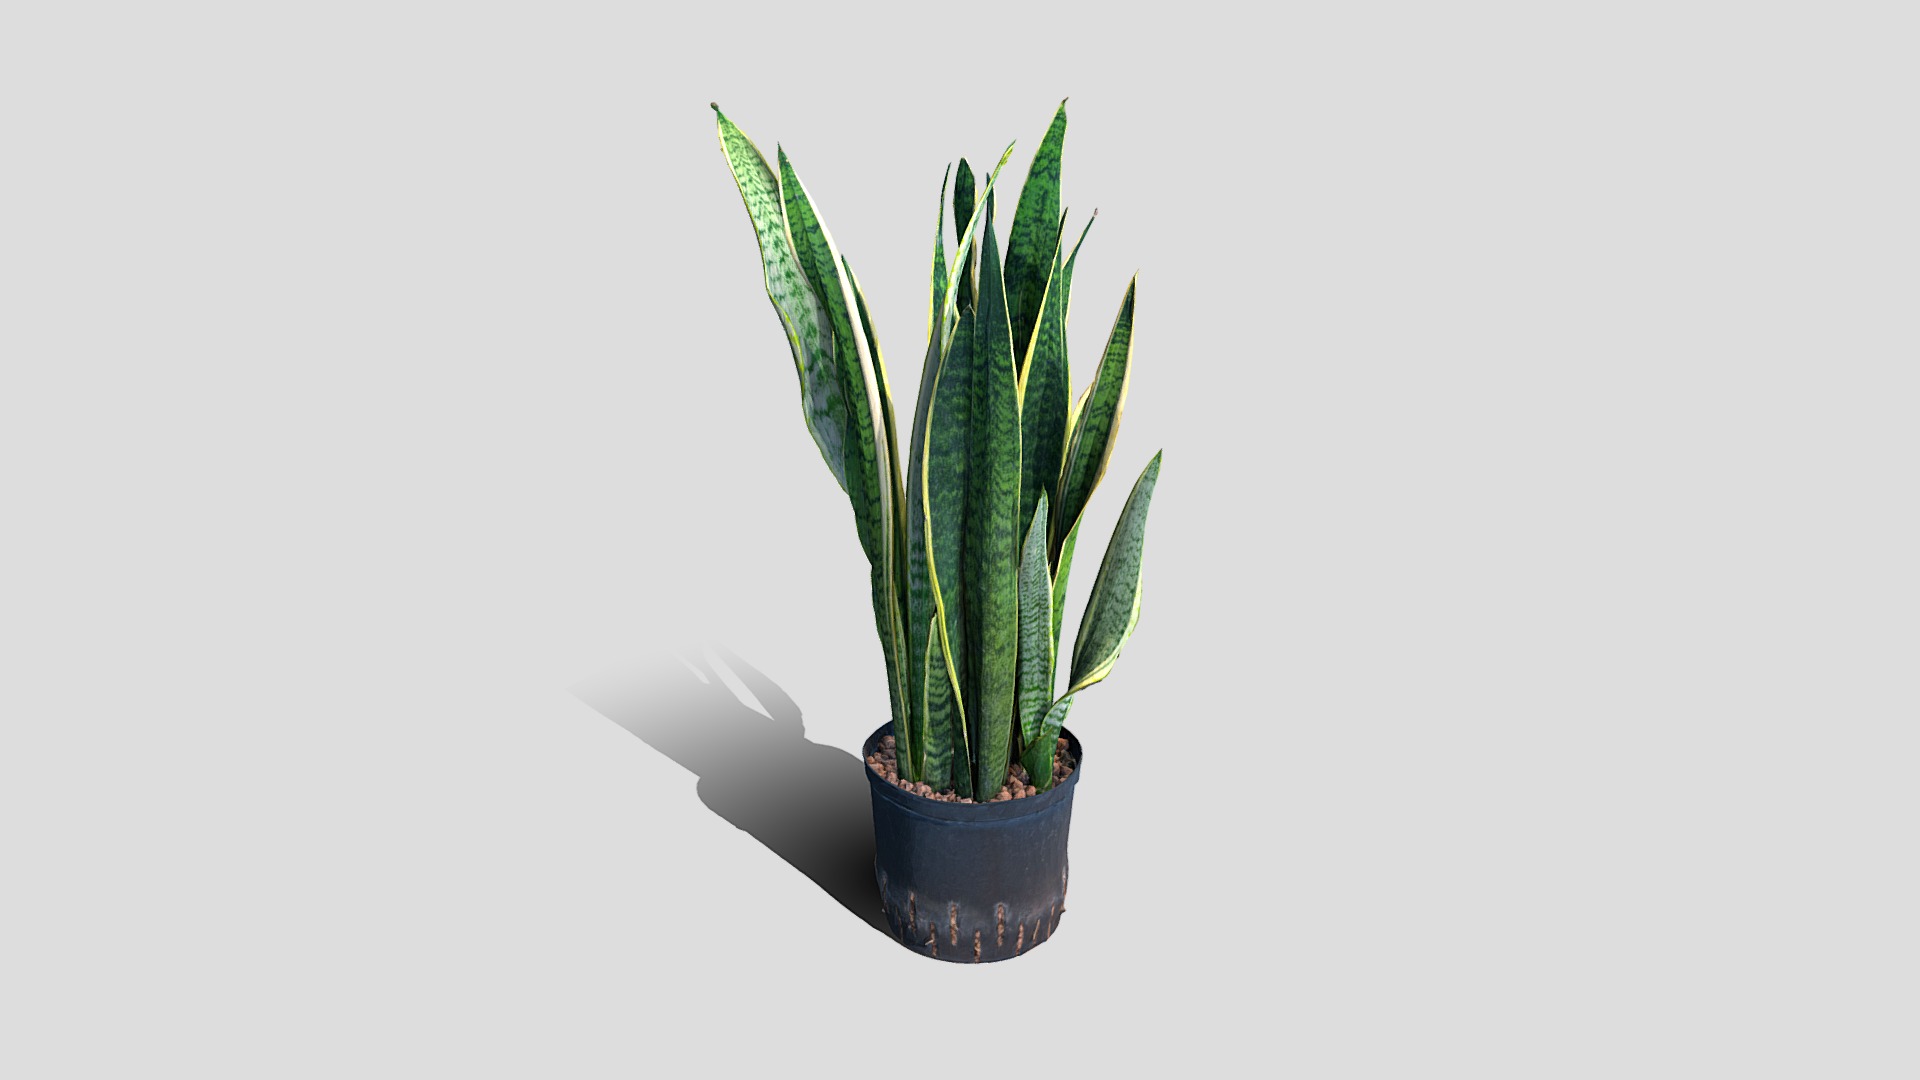 3D model 000026_Sansevieria 2 - This is a 3D model of the 000026_Sansevieria 2. The 3D model is about a plant in a pot.